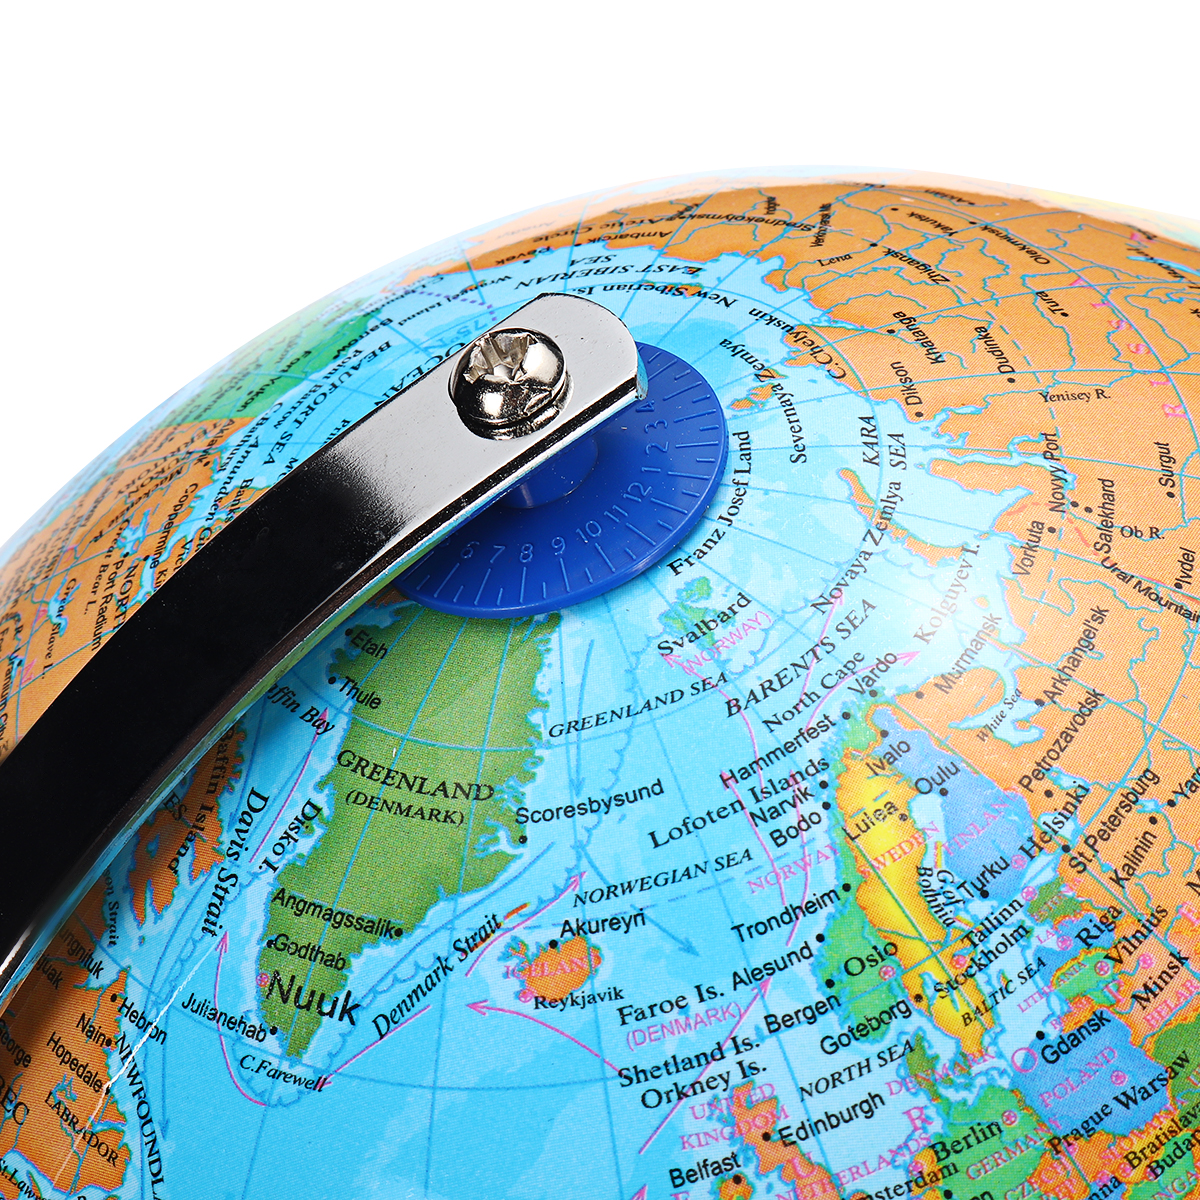 8inch-Stand-Rotating-World-Globe-Map-Kids-Toy-School-Student-Educational-Gift-1783975-9